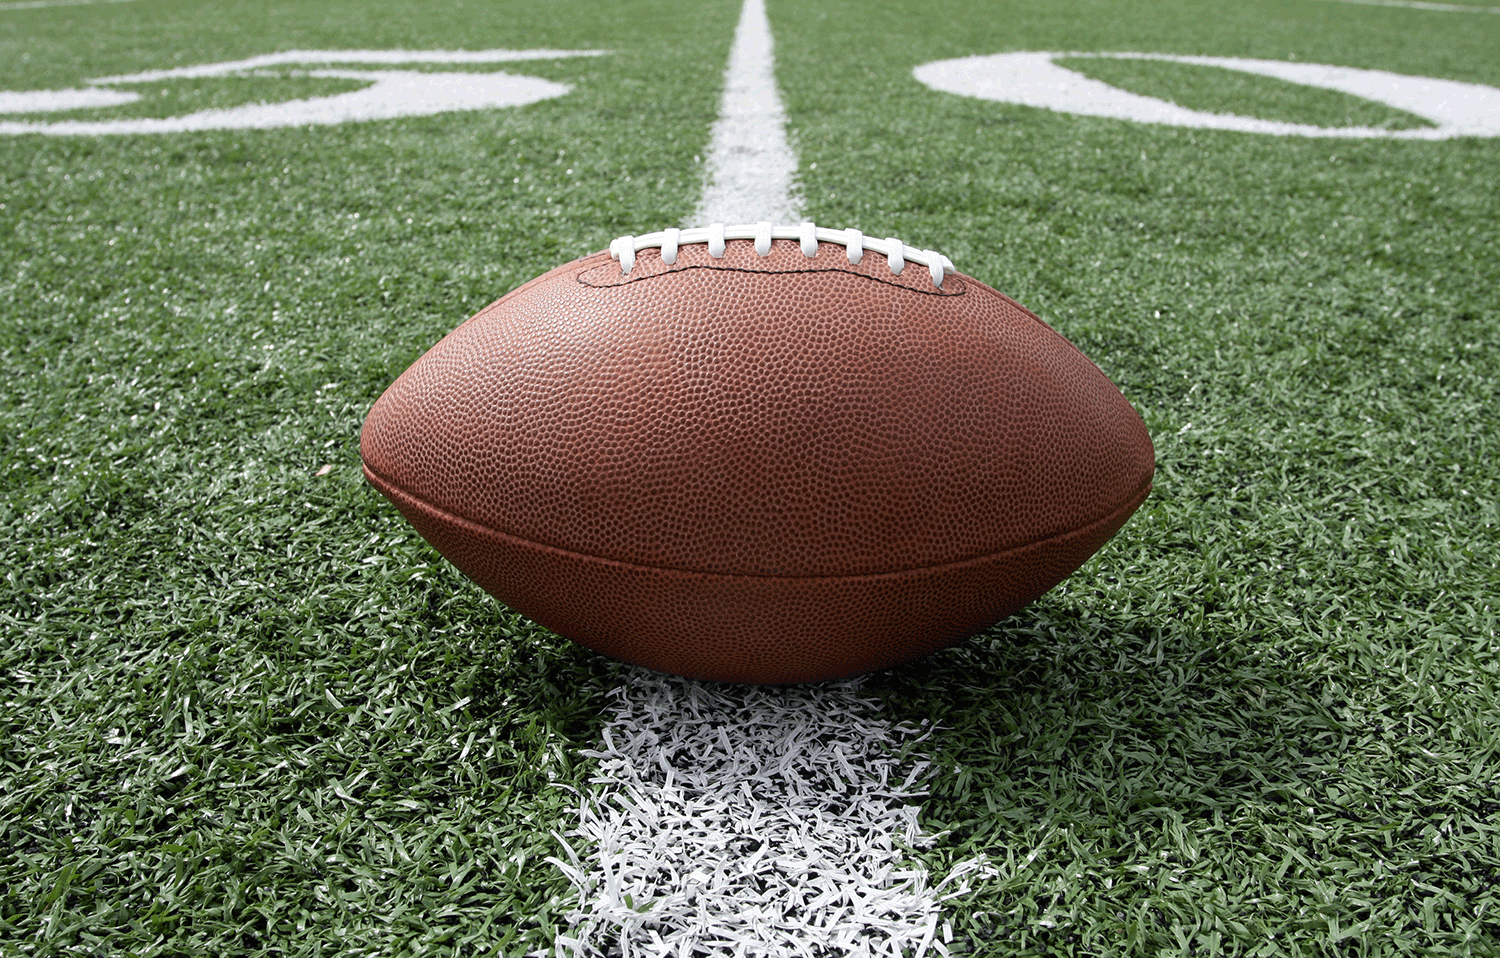 Ground level view of a football on the fifty yard line